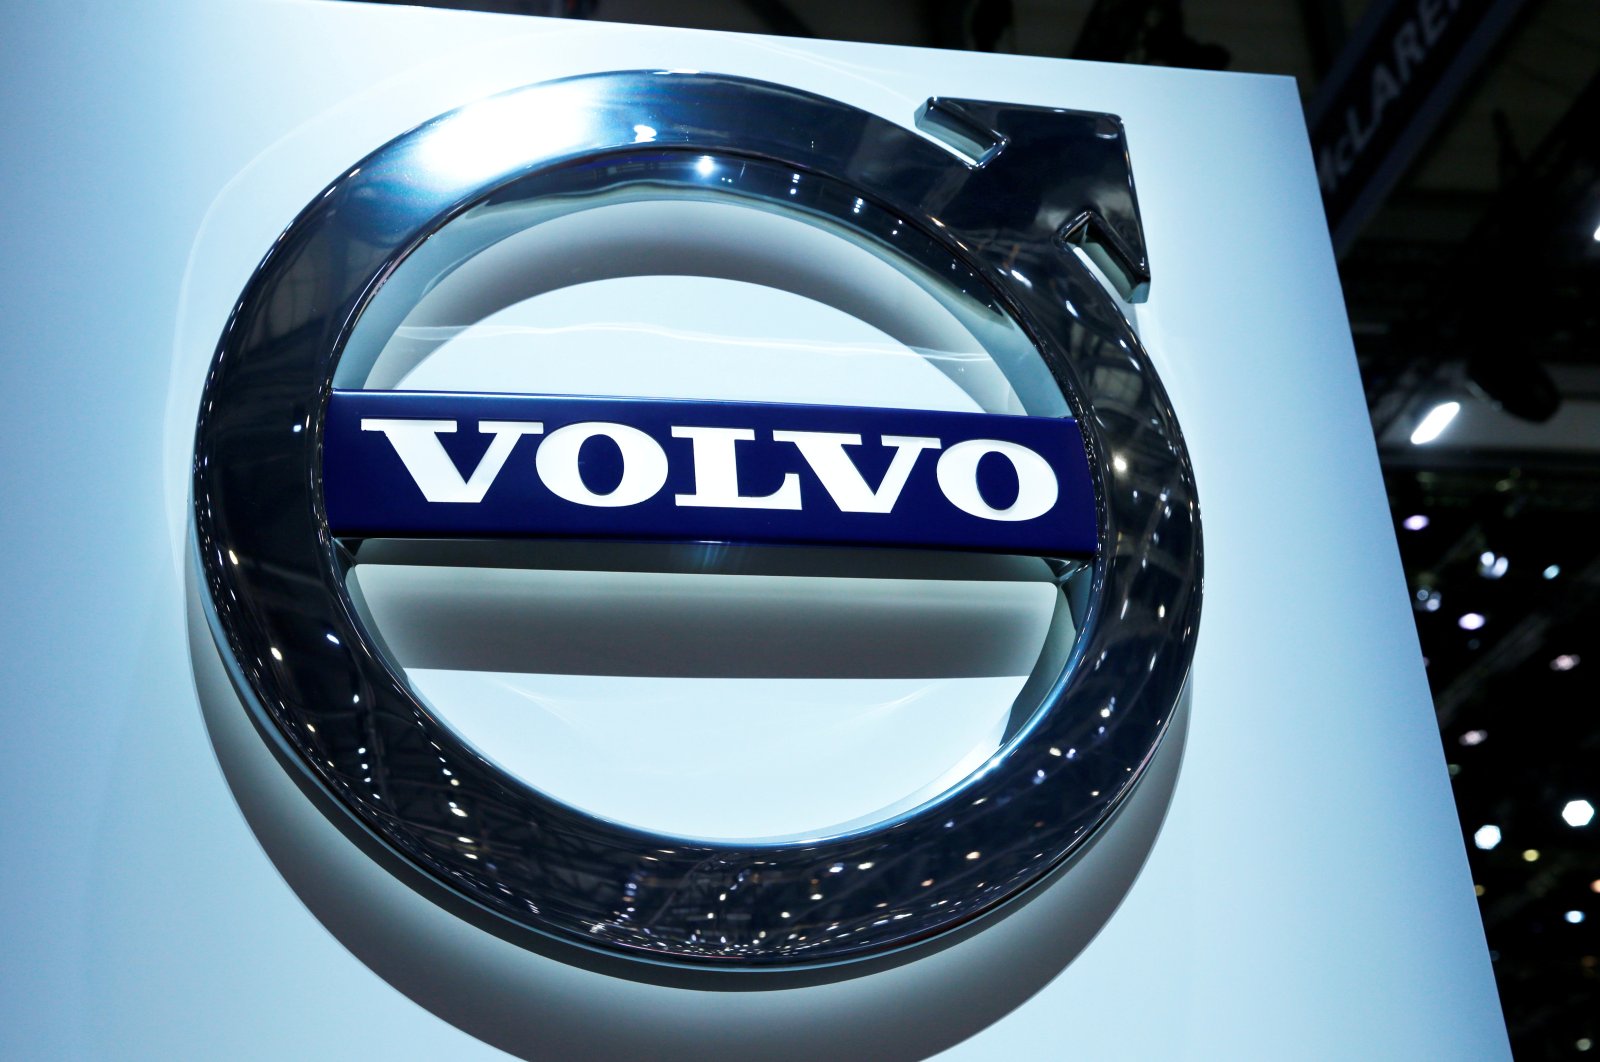 A Volvo logo is pictured during the 87th International Motor Show at Palexpo in Geneva, Switzerland, March 7, 2017. (Reuters Photo)